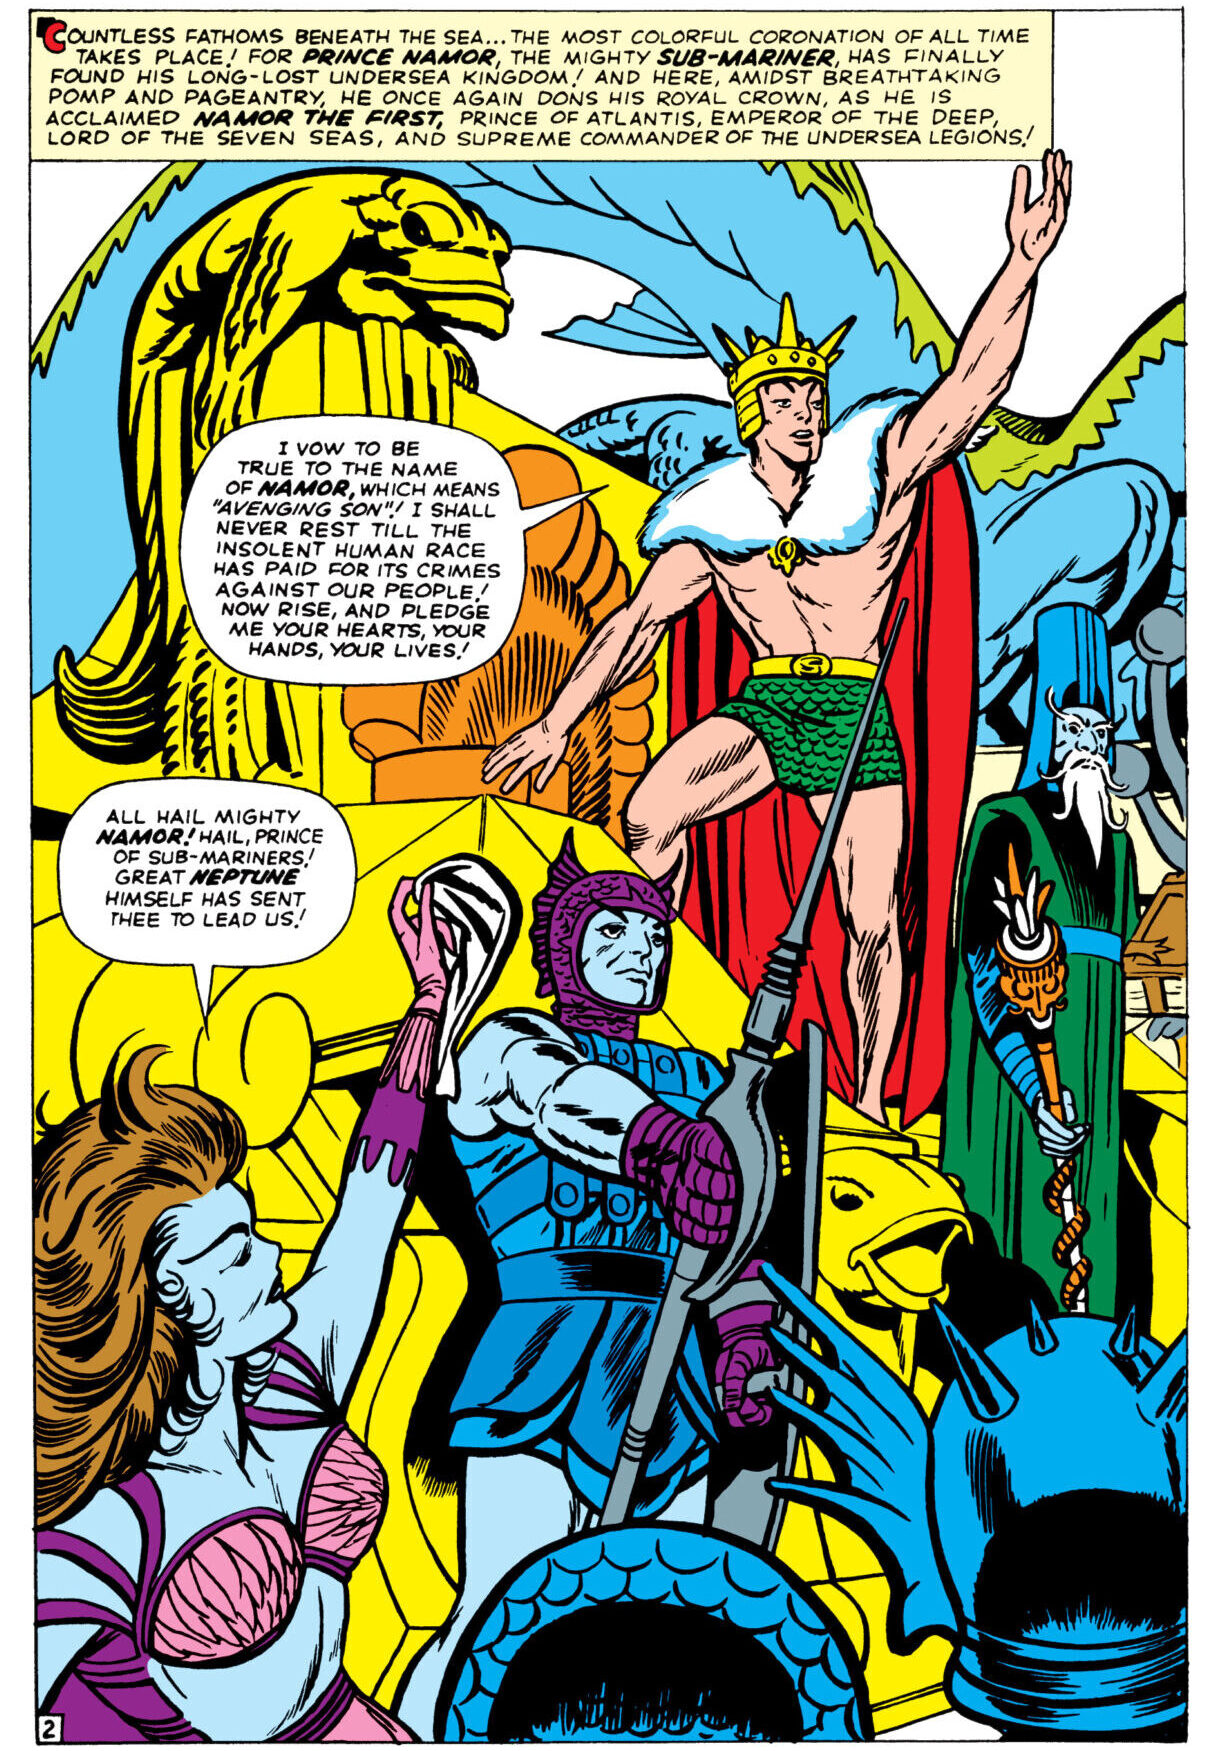 Namor ascends to the throne in Fantastic Four Annual Vol. 1 #1 "Sub-Mariner Versus the Human Race! (1963), Marvel Comics. Words by Stan Lee, art by Jack Kirby, Dick Ayers, Glynis Wein, and Artie Smiek.